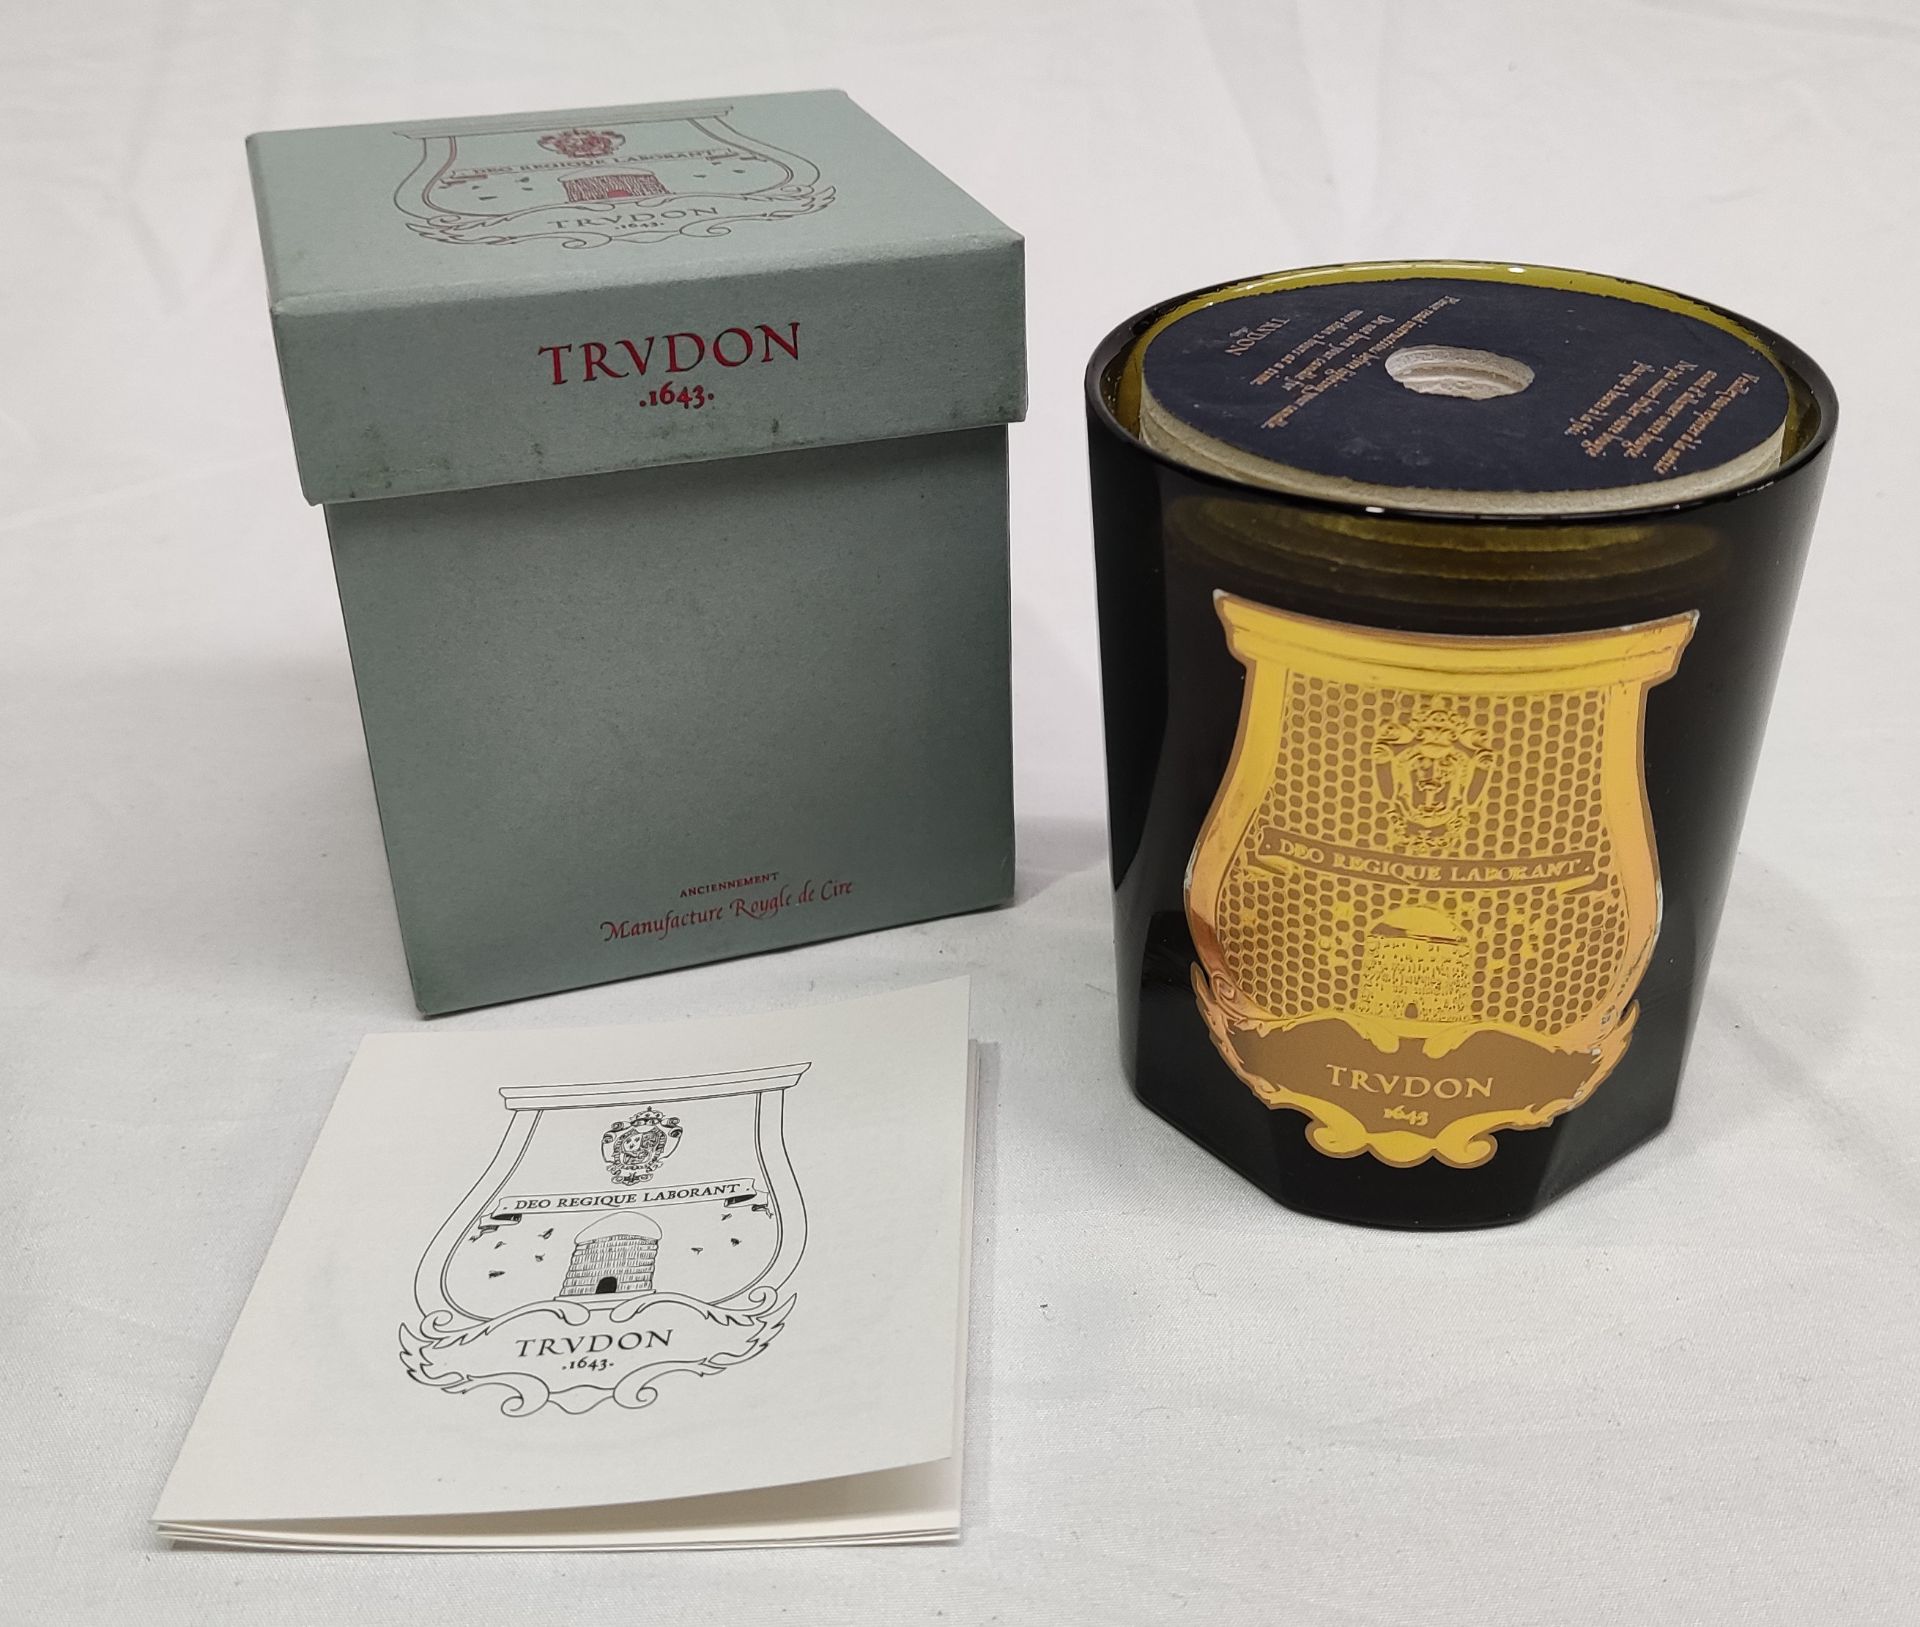 1 x TRUDON Ernesto 270G Candle - New/Boxed - Original RRP £90 - Ref: 2559342/HJL441/C28/07-23 - - Image 2 of 19